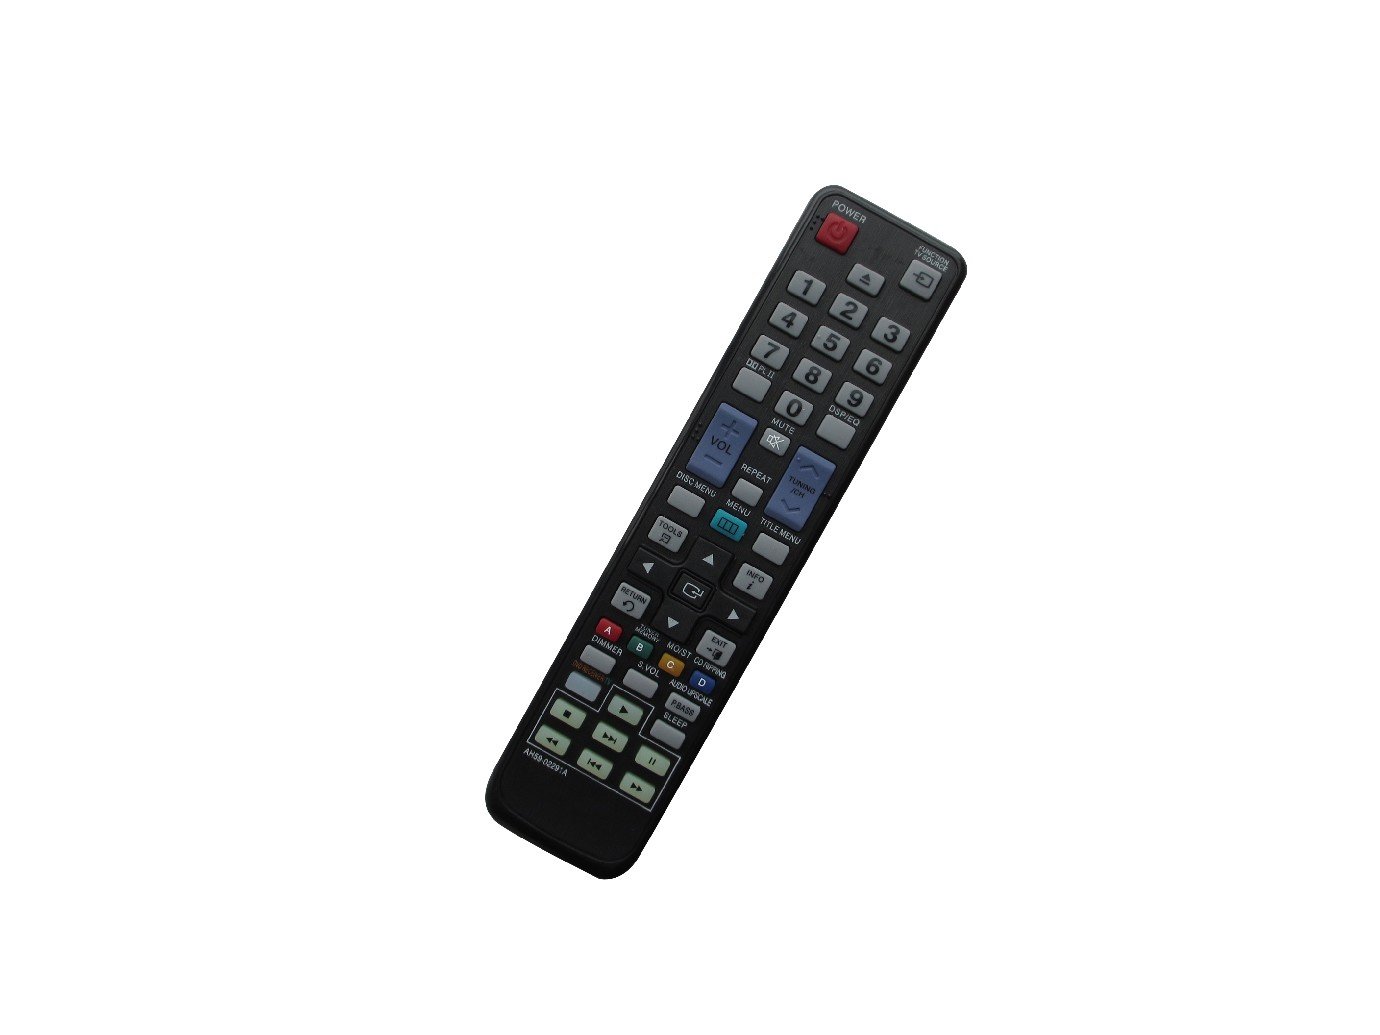 HCDZ Replacement Remote Control for Samsung AH59-02144S HT-BD1200 HT-BD1250W HT-BD1250/XAA HT-BD1252 HT-BD1255 HT-BD1252W Blu-ray DVD Home Theater System